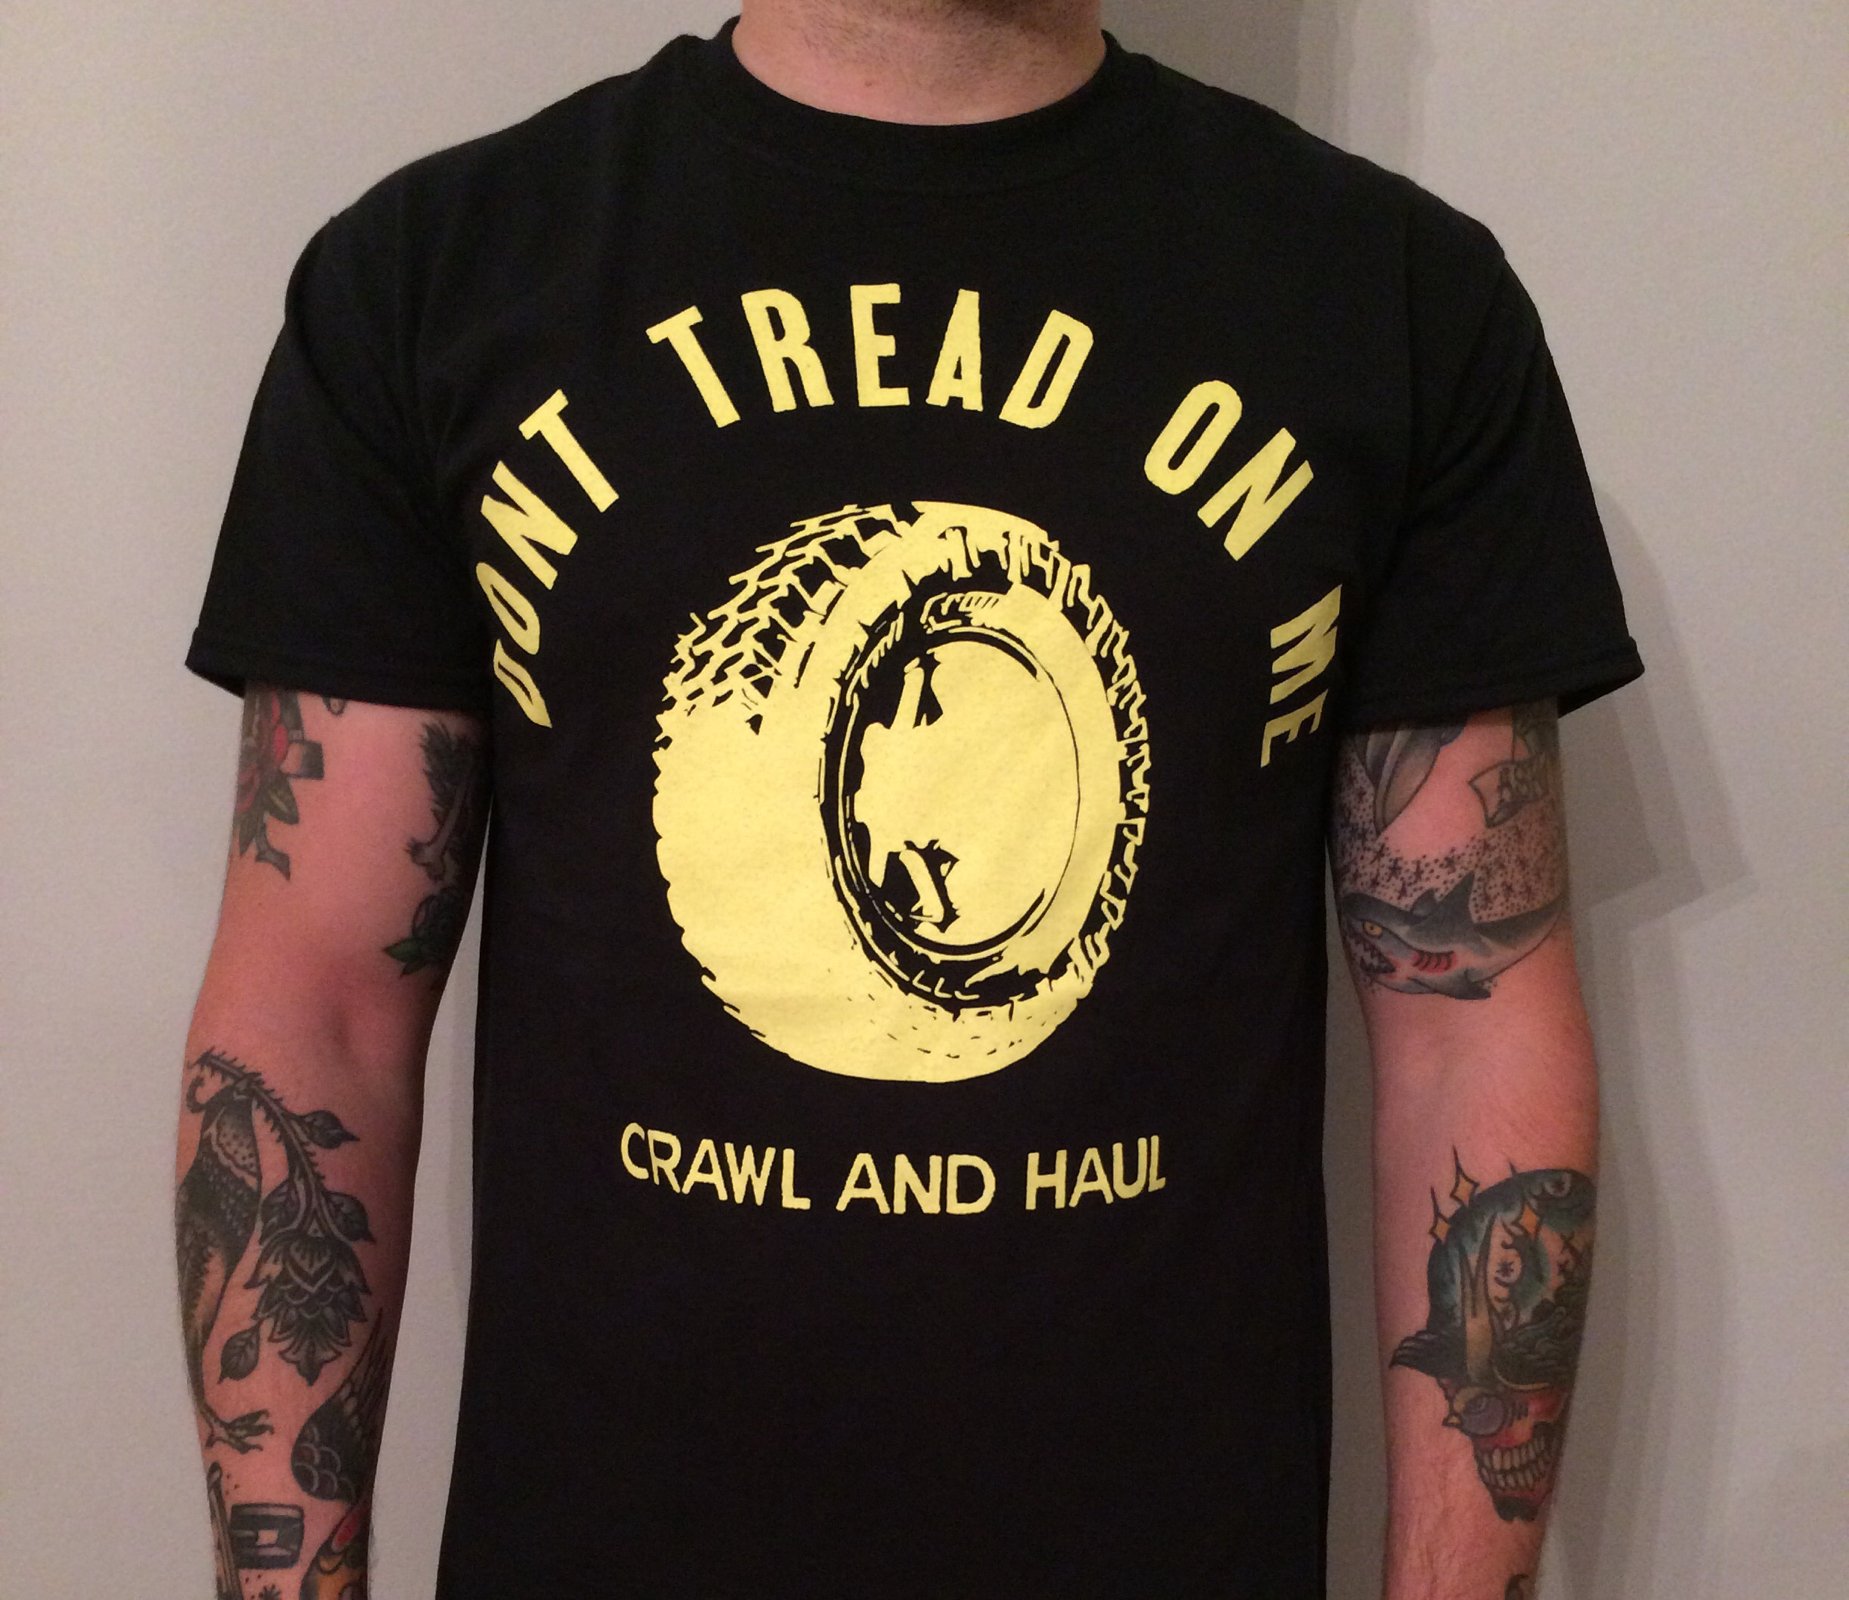 Crawl and Haul — Don't Tread On Me